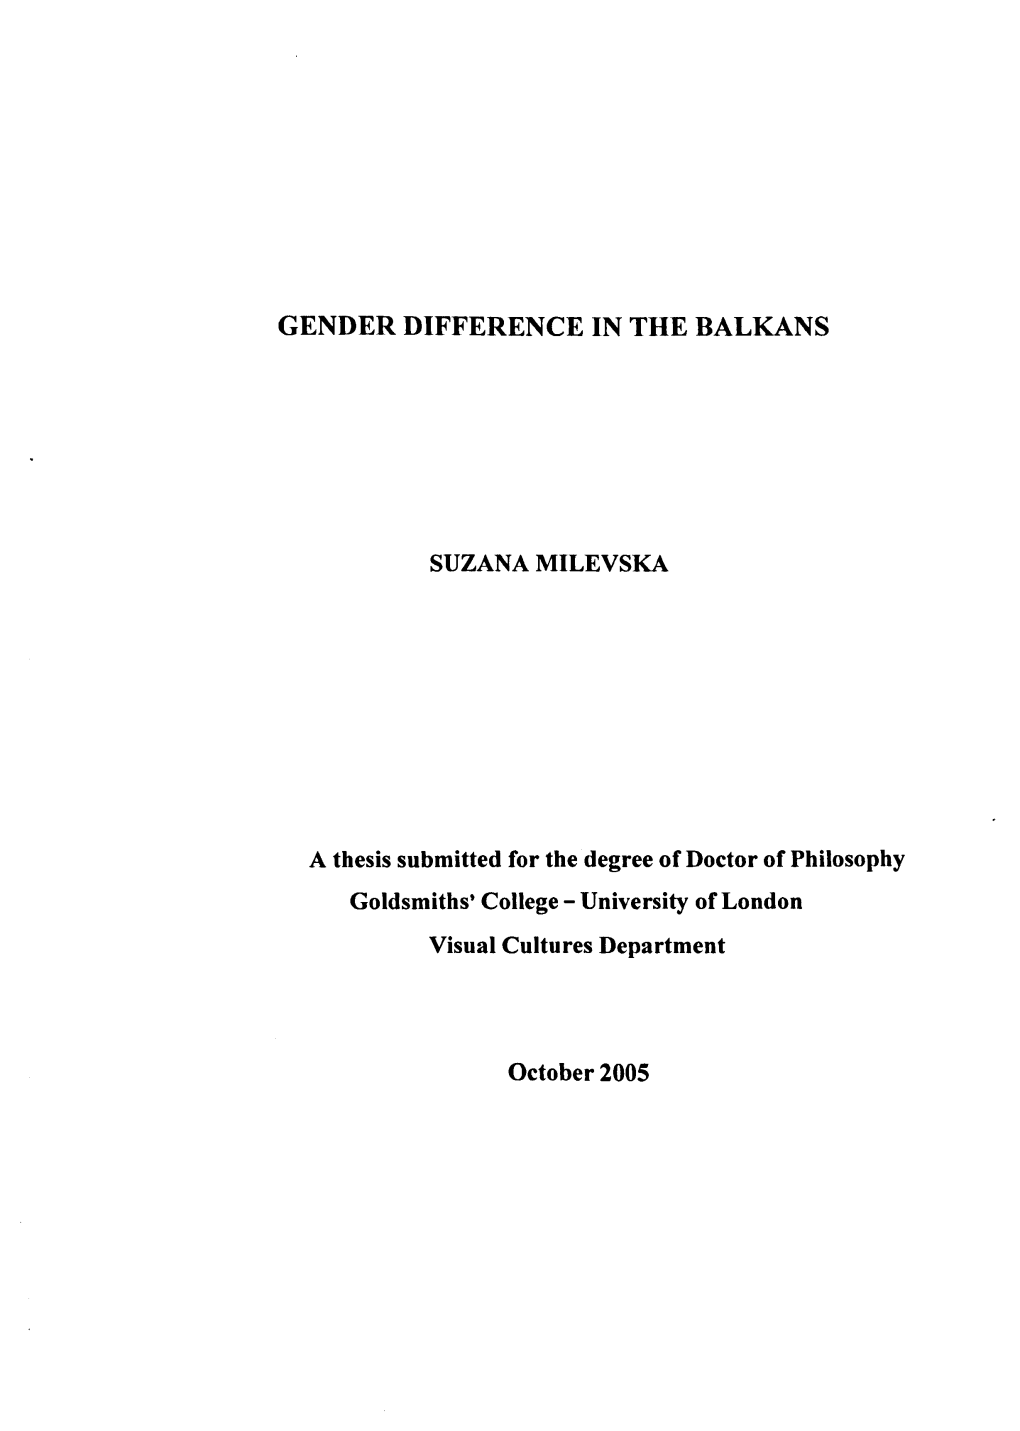 Gender Difference in the Balkans